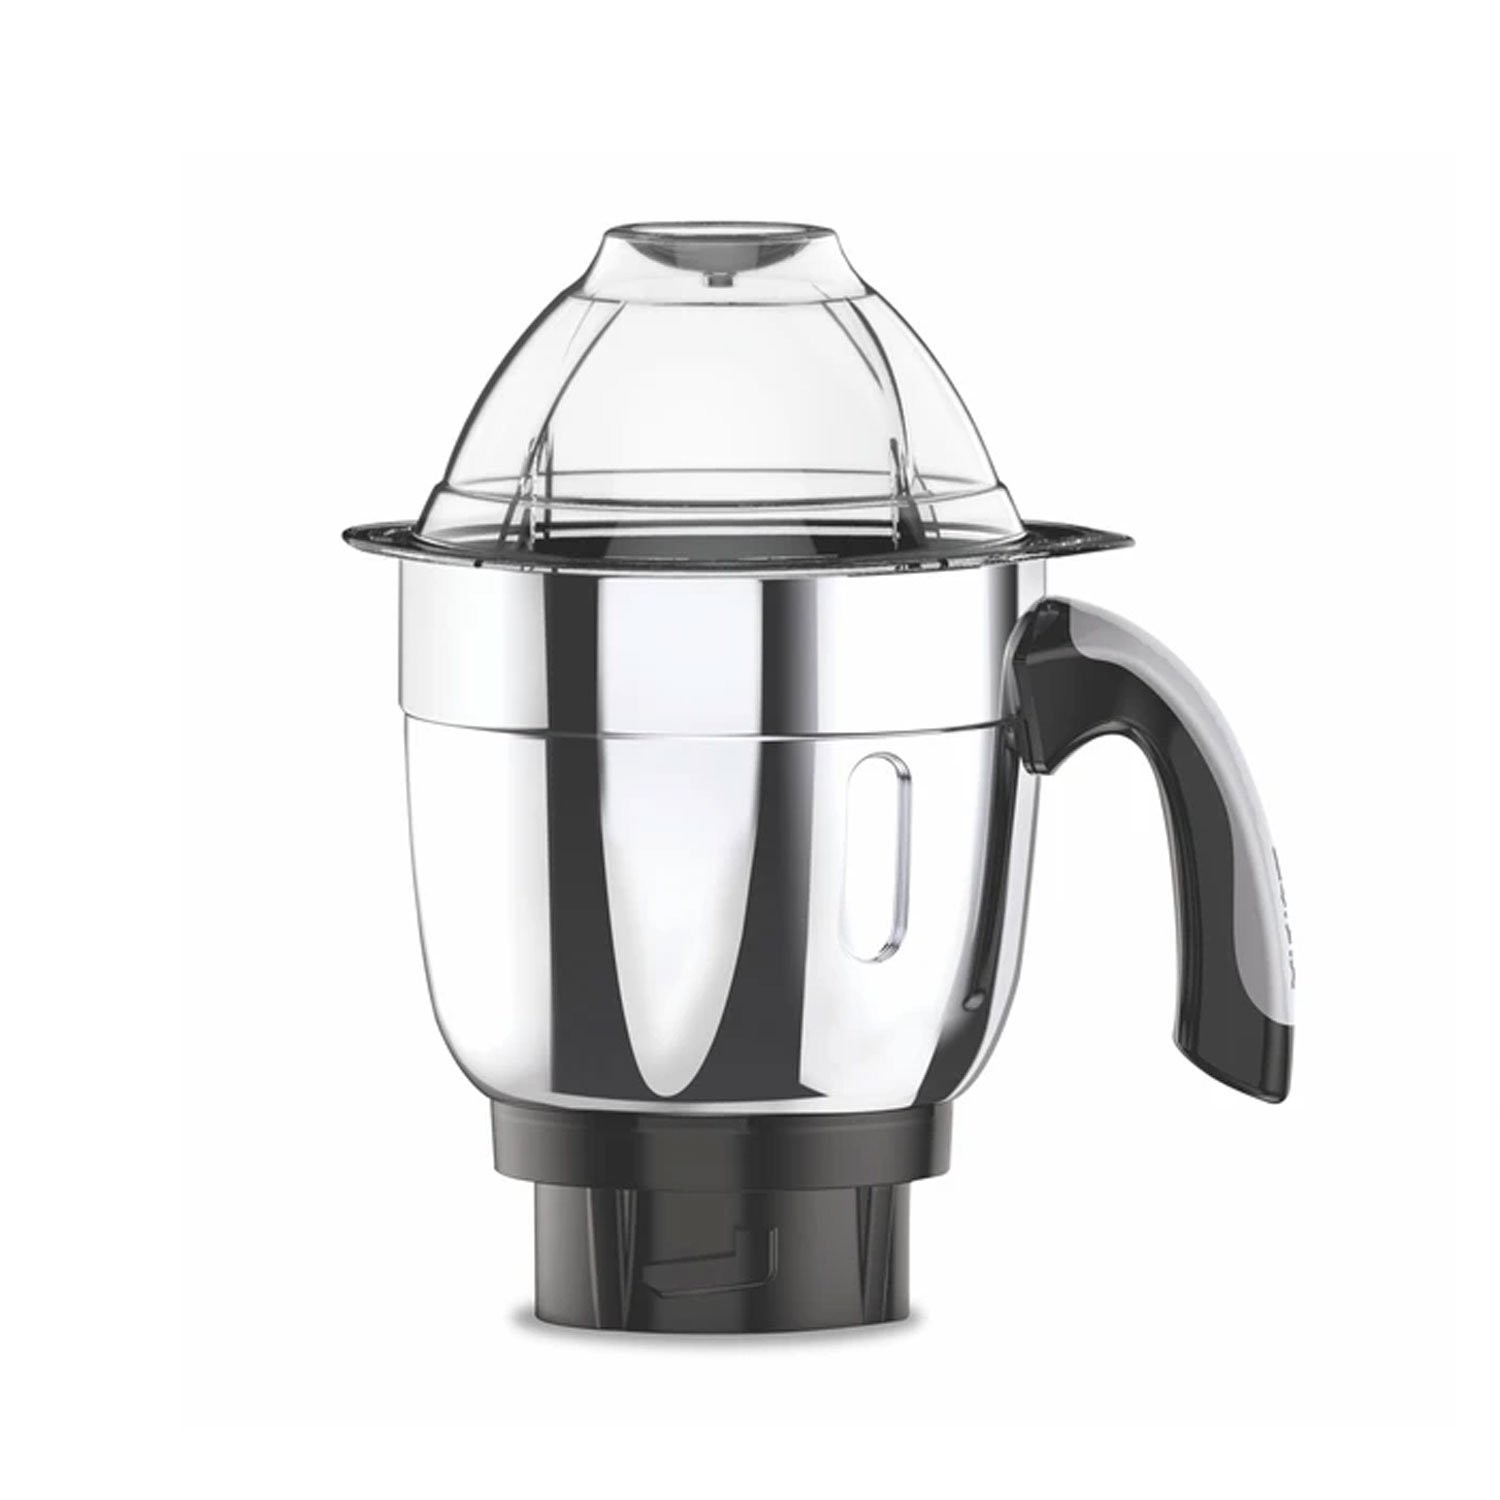 vidiem-eva-nero-650w-stainless-steel-jars-indian-mixer-grinder-spice-coffee-grinder-110v-for-use-in-canada-usa4